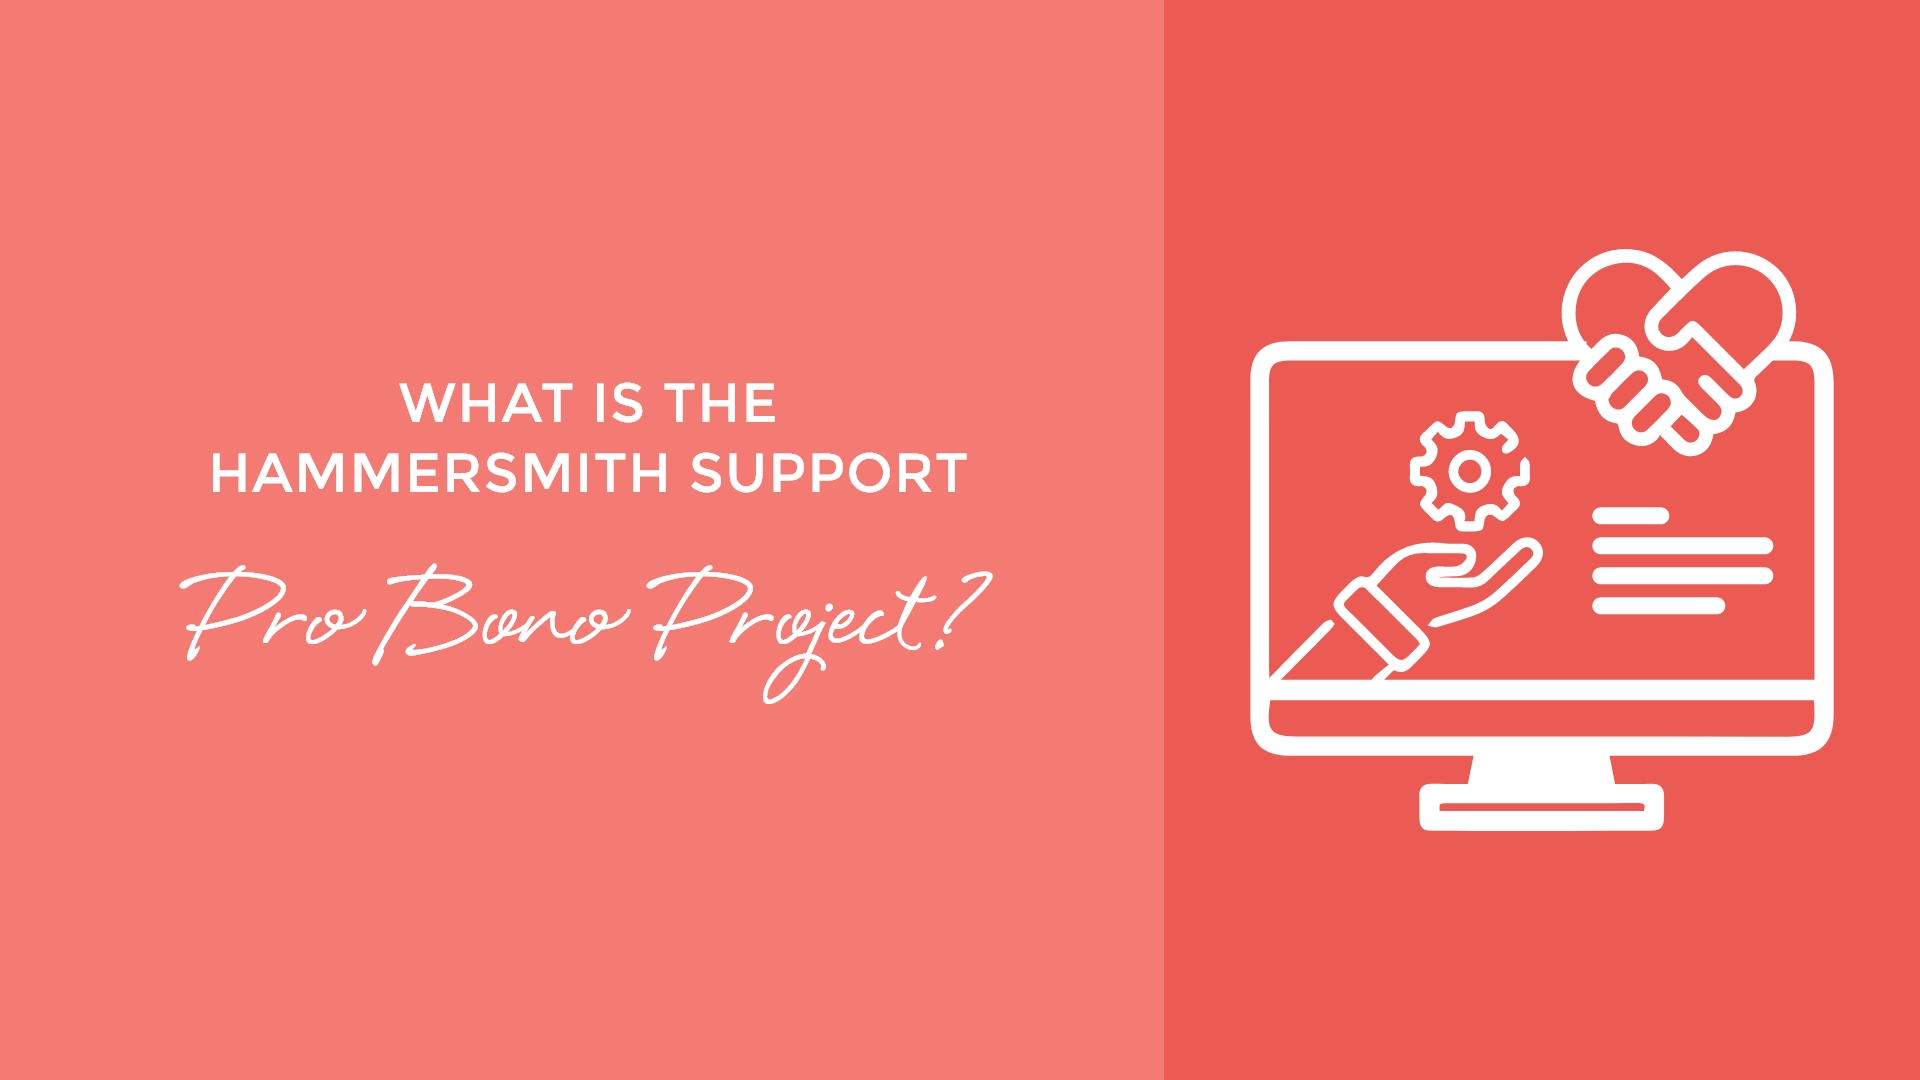 What is the Hammersmith Support Pro Bono Project?